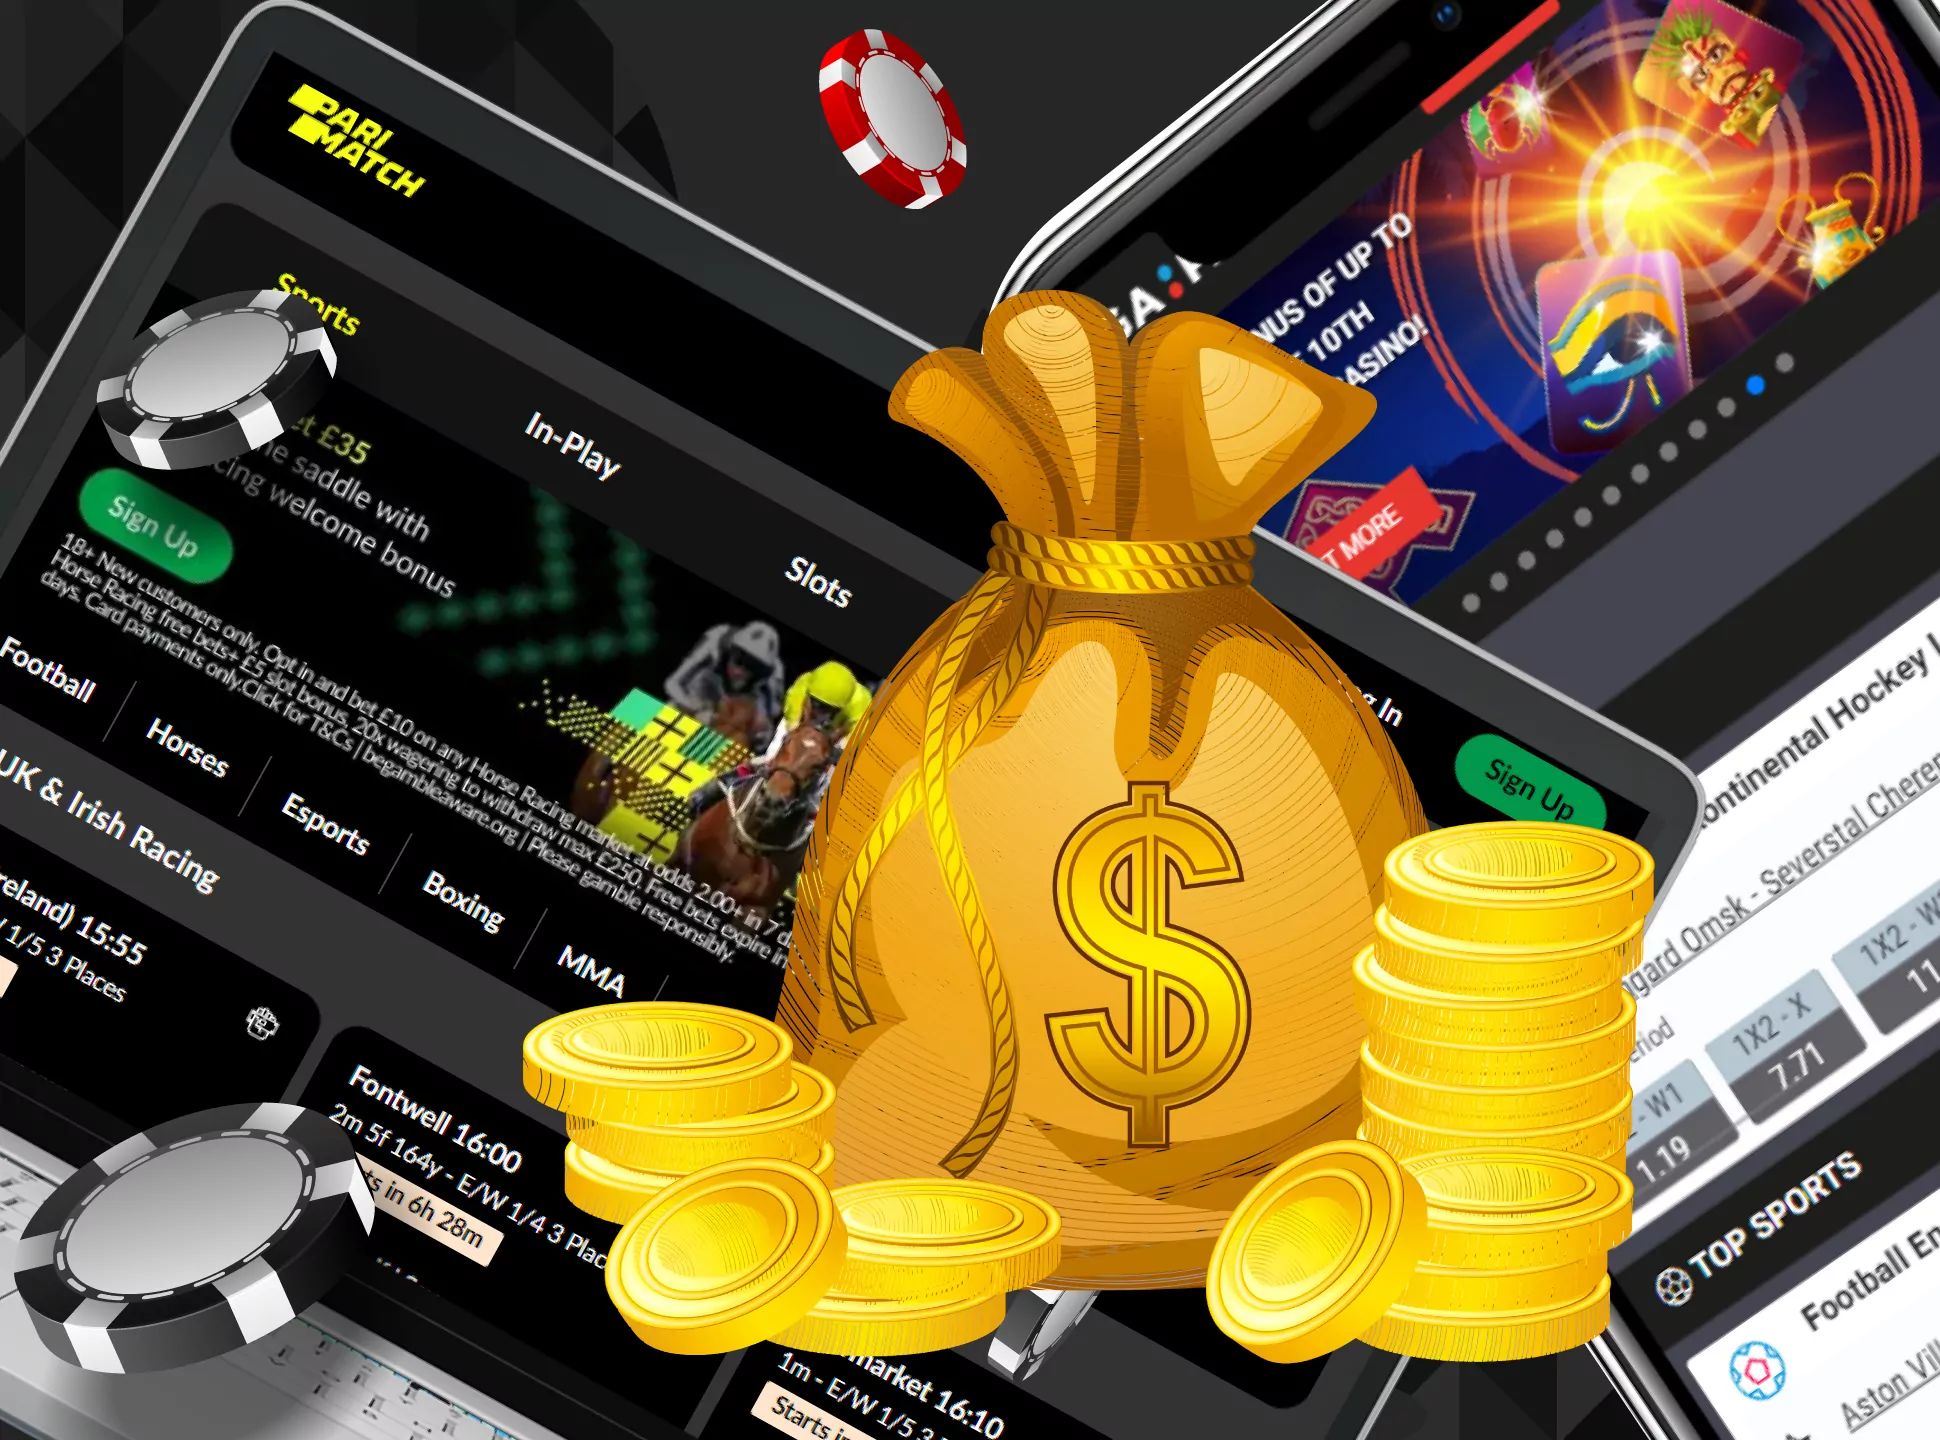 Figure oyt the license, bonuses, mobile app and other criteria to choose the best online casino.